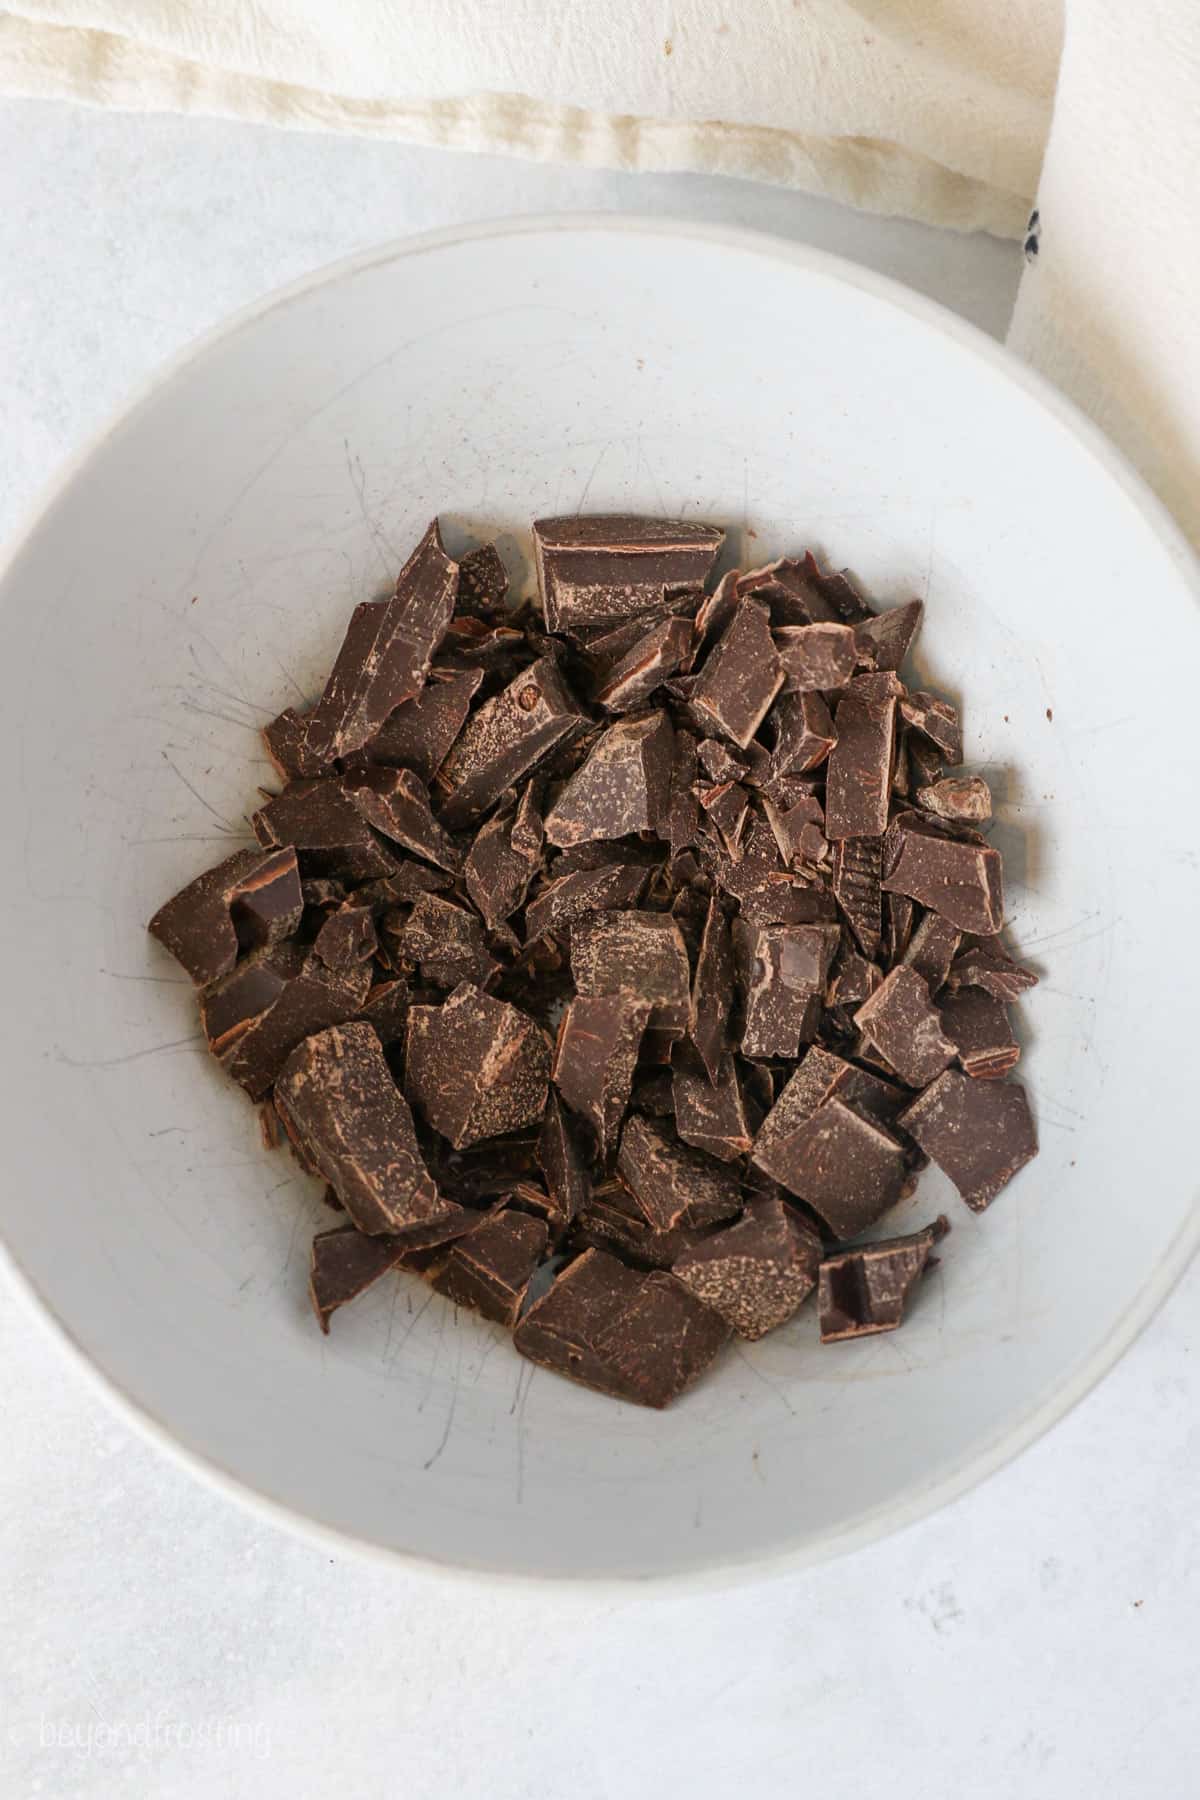 Chopped chocolate in a white bowl.